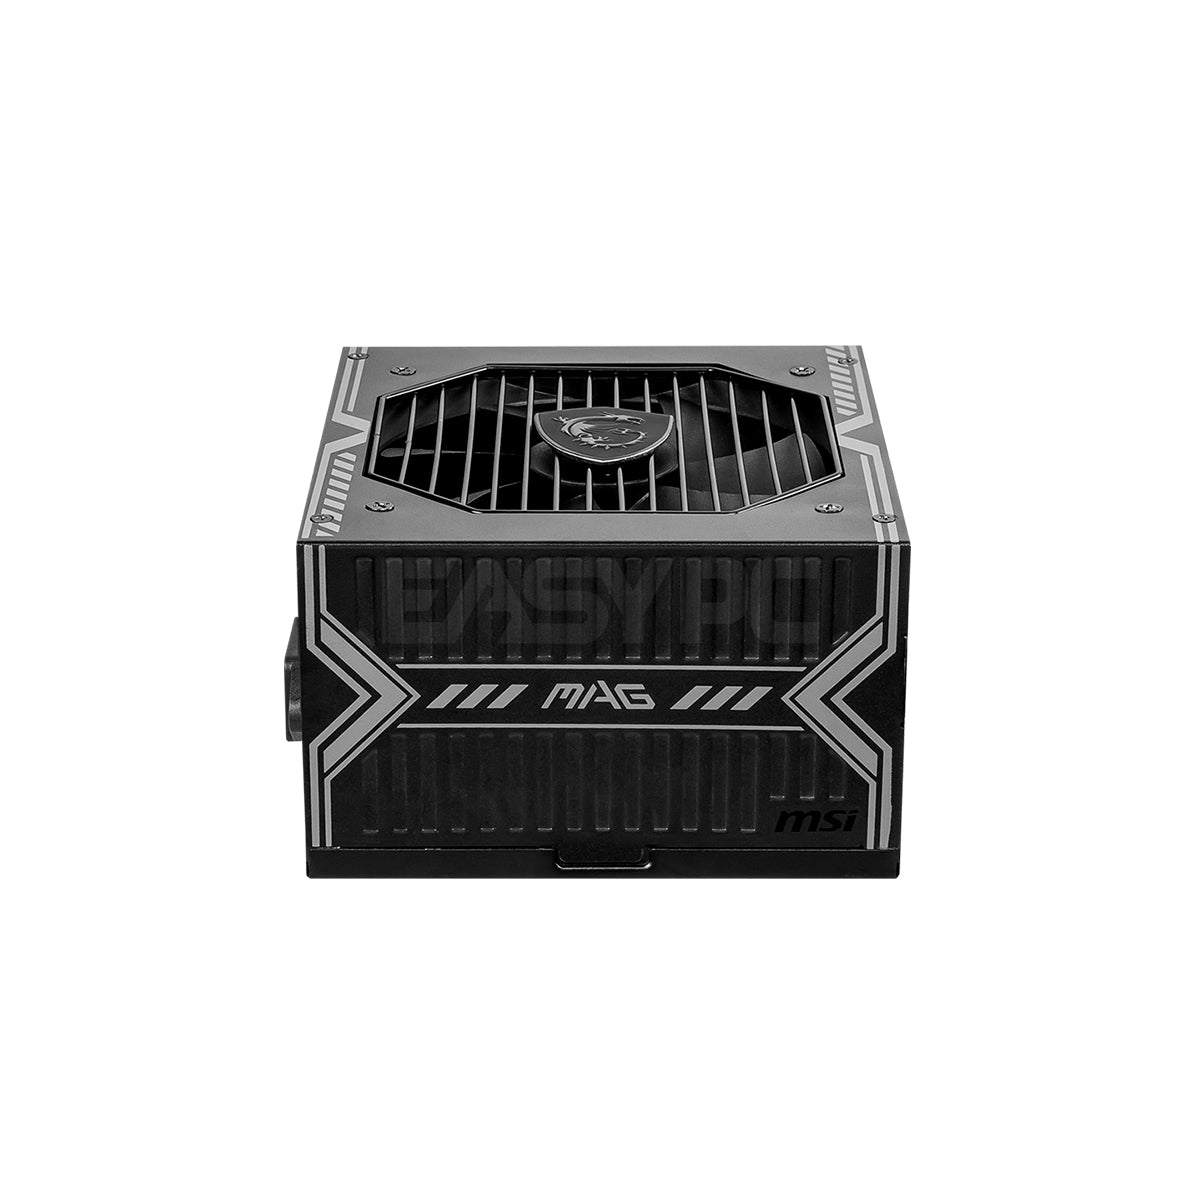 MSI MAG A650BN 650 W 80+ Bronze Certified ATX Power Supply (MAG